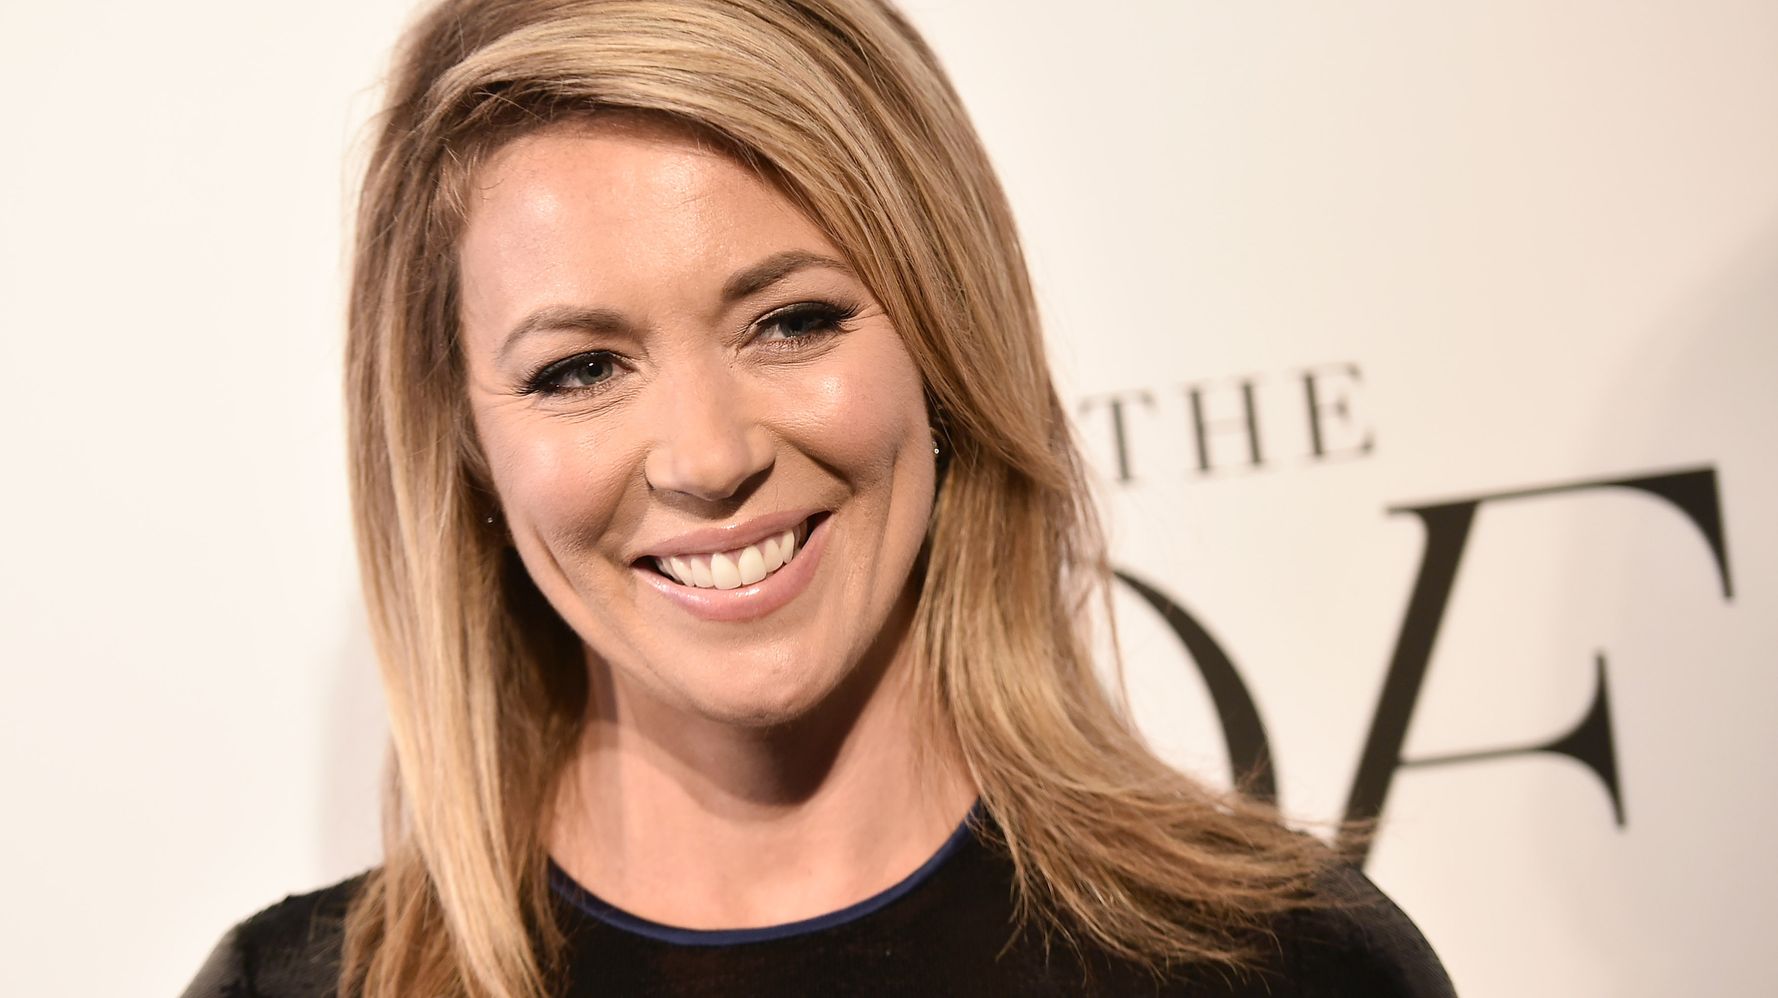 Brooke Baldwin announces she will leave CNN: “I have more to do”